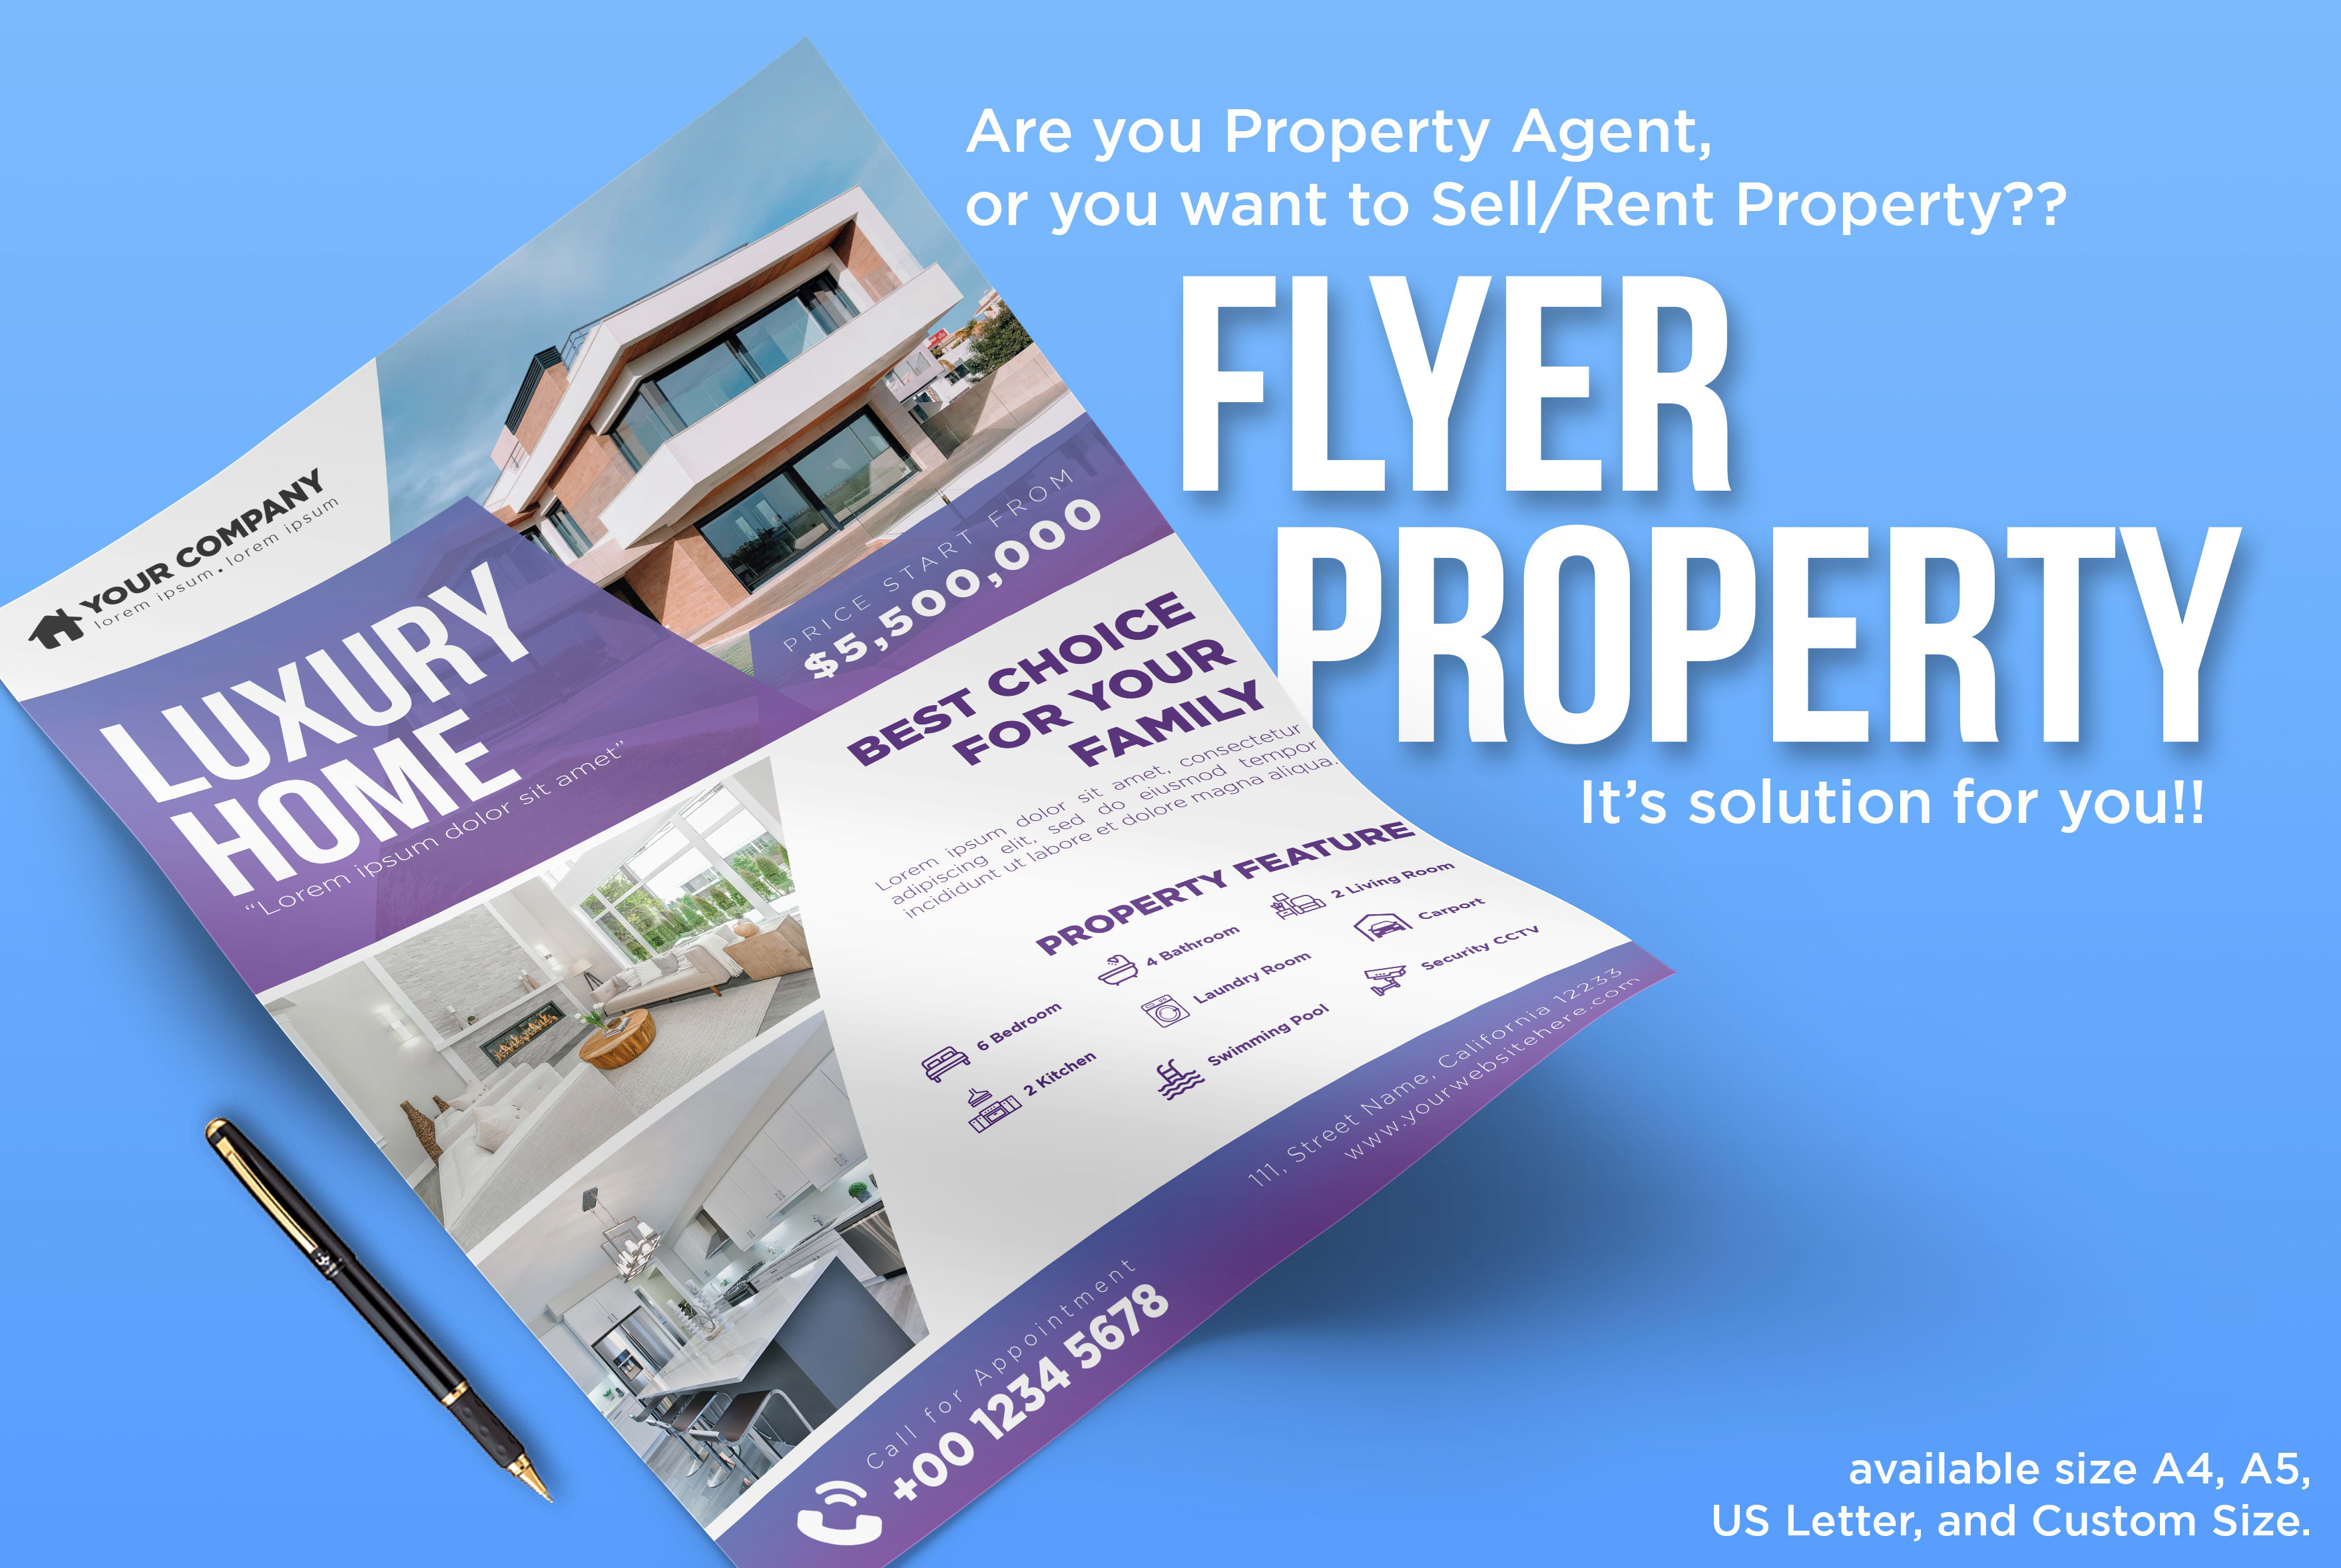 Design flyer property agent, property sale, rent property by Graphicidn | Fiverr